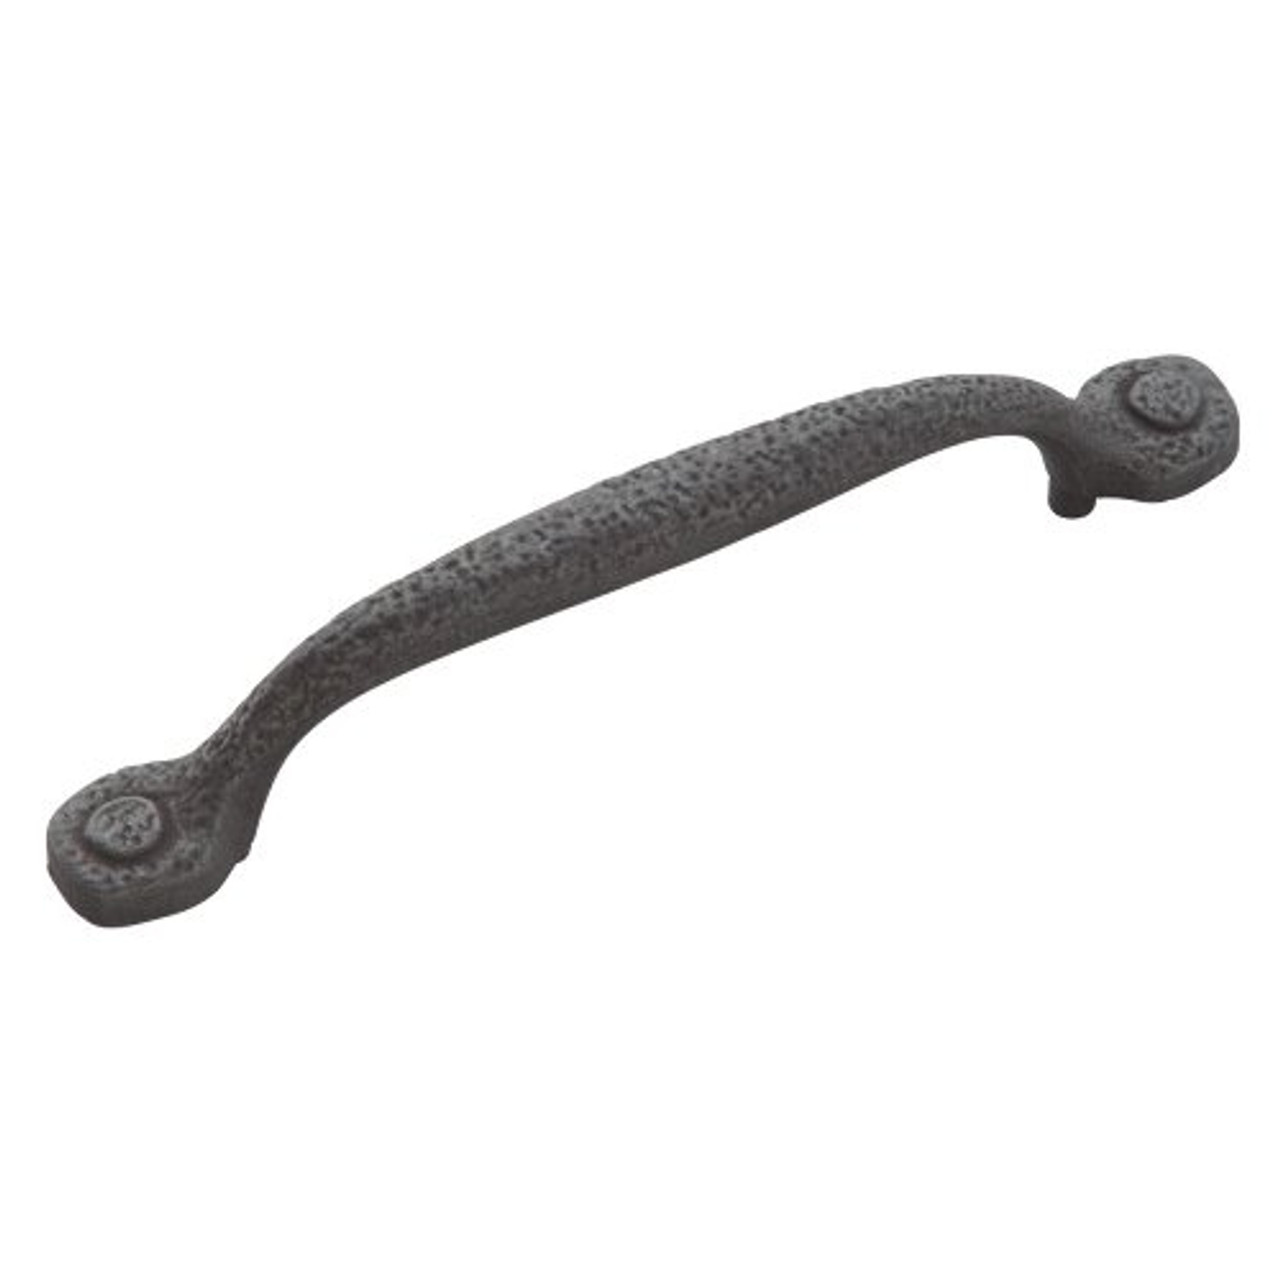 Hickory Hardware REFINED RUSTIC PULLS 3" thru 12" Centers